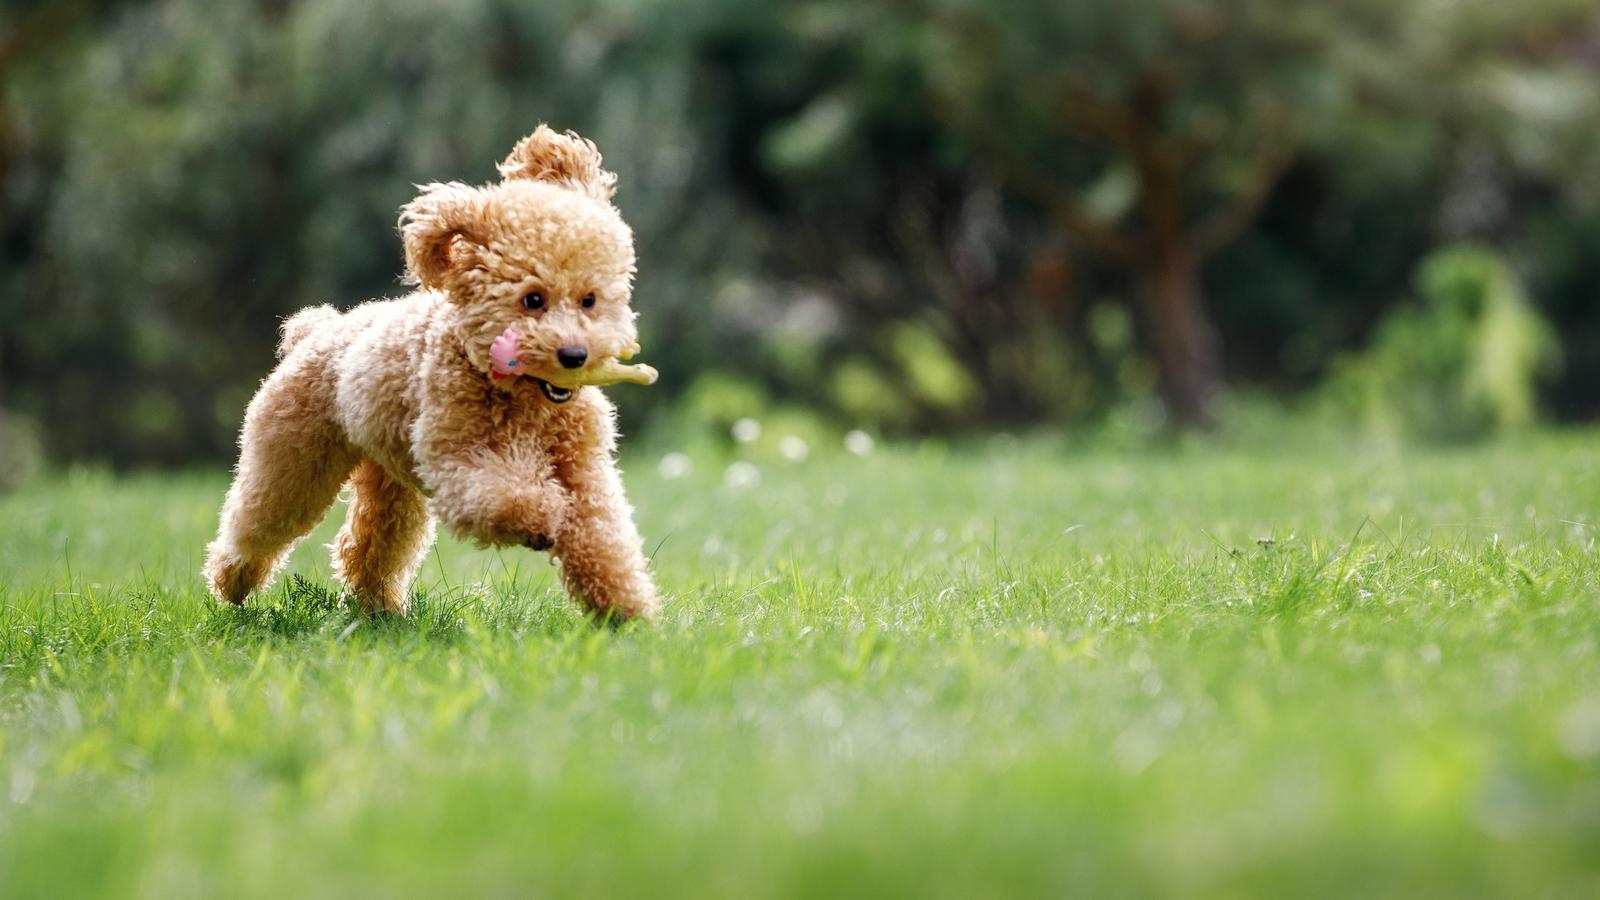 How much benadryl can you give a toy poodle?